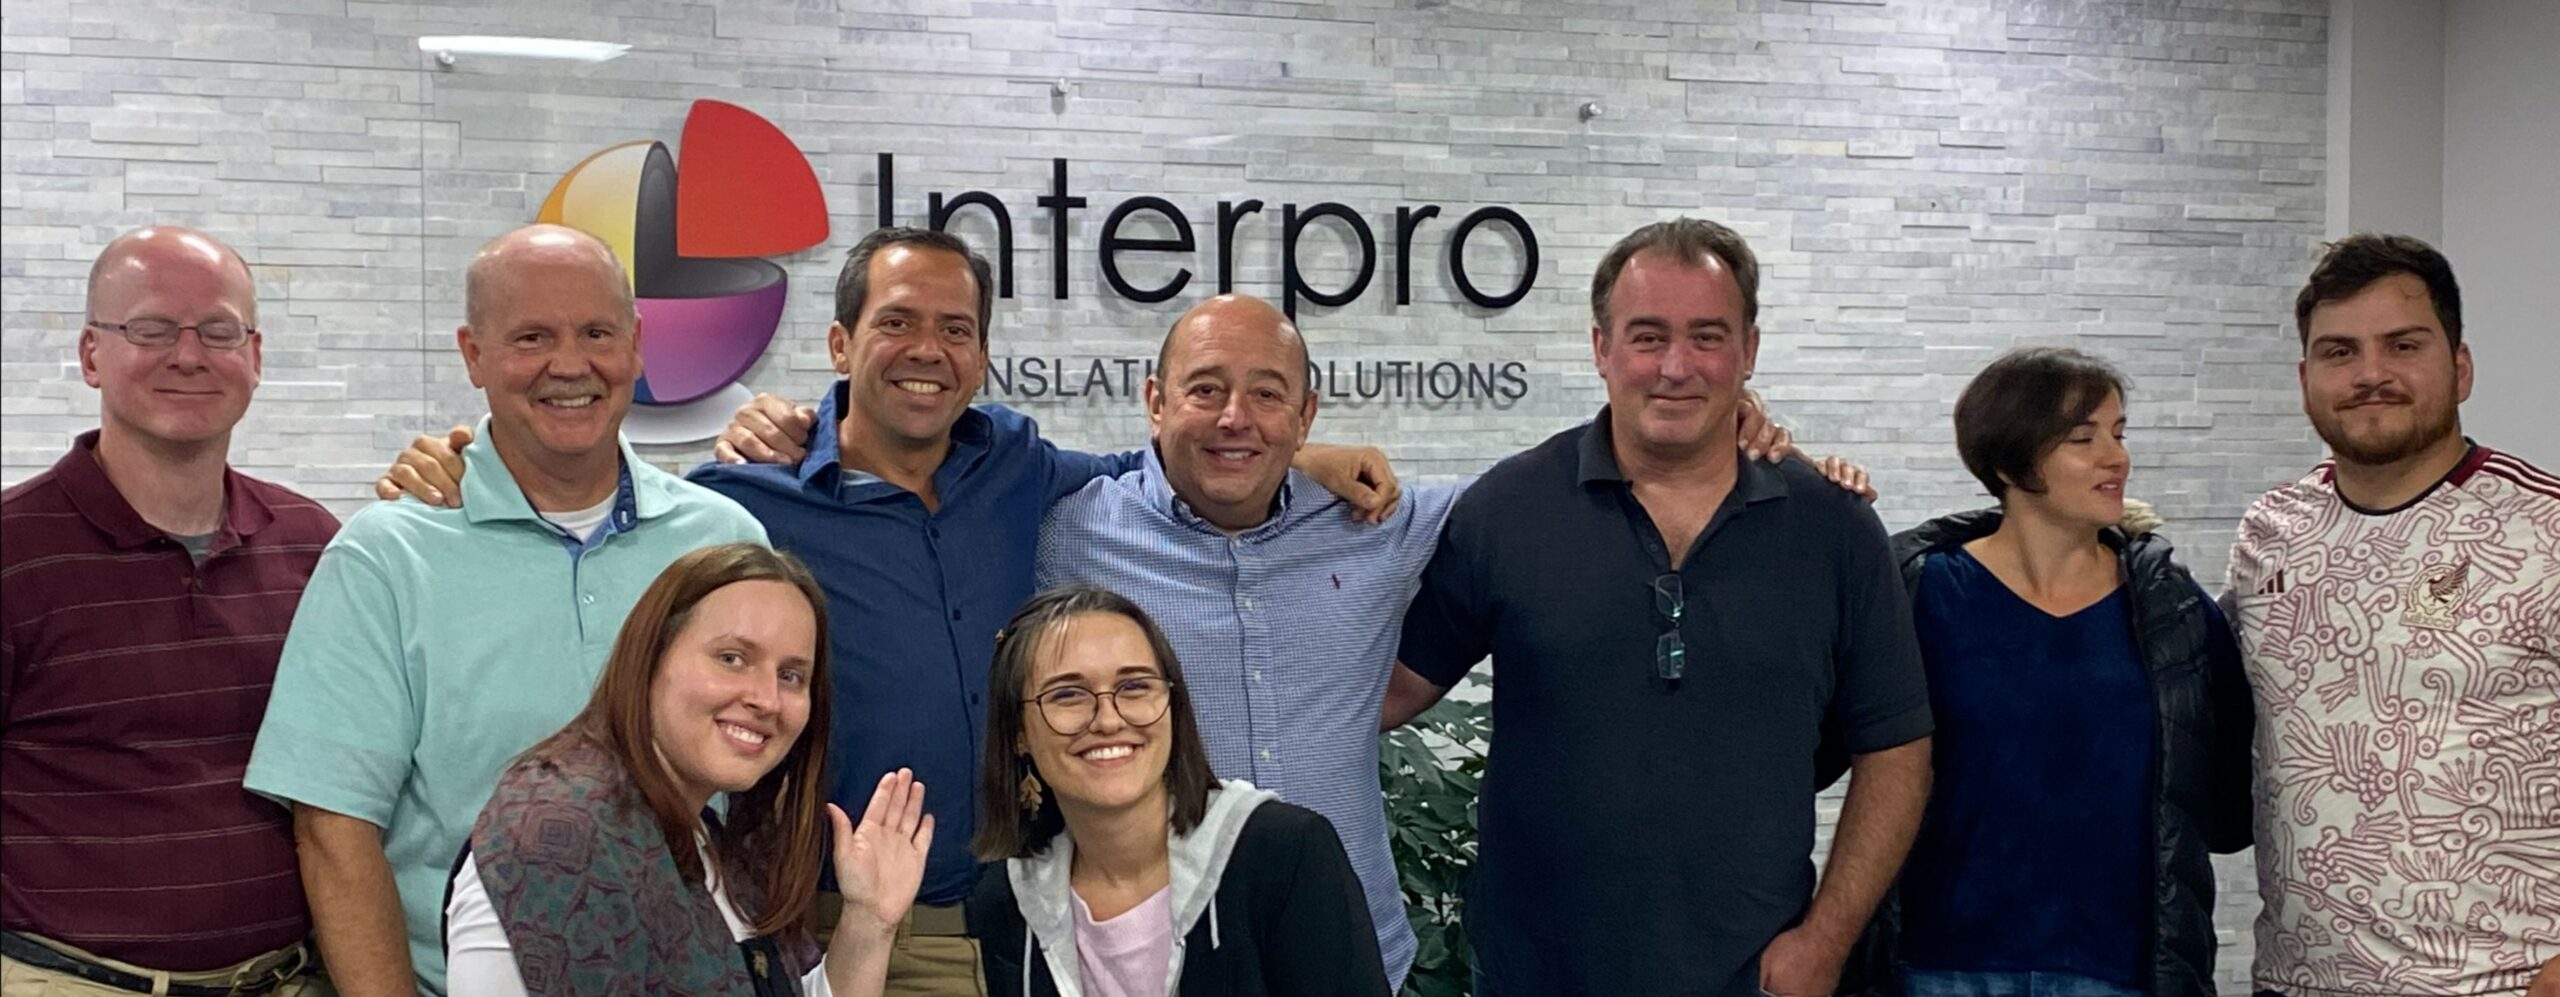 The Interpro Team at the New Headquarters